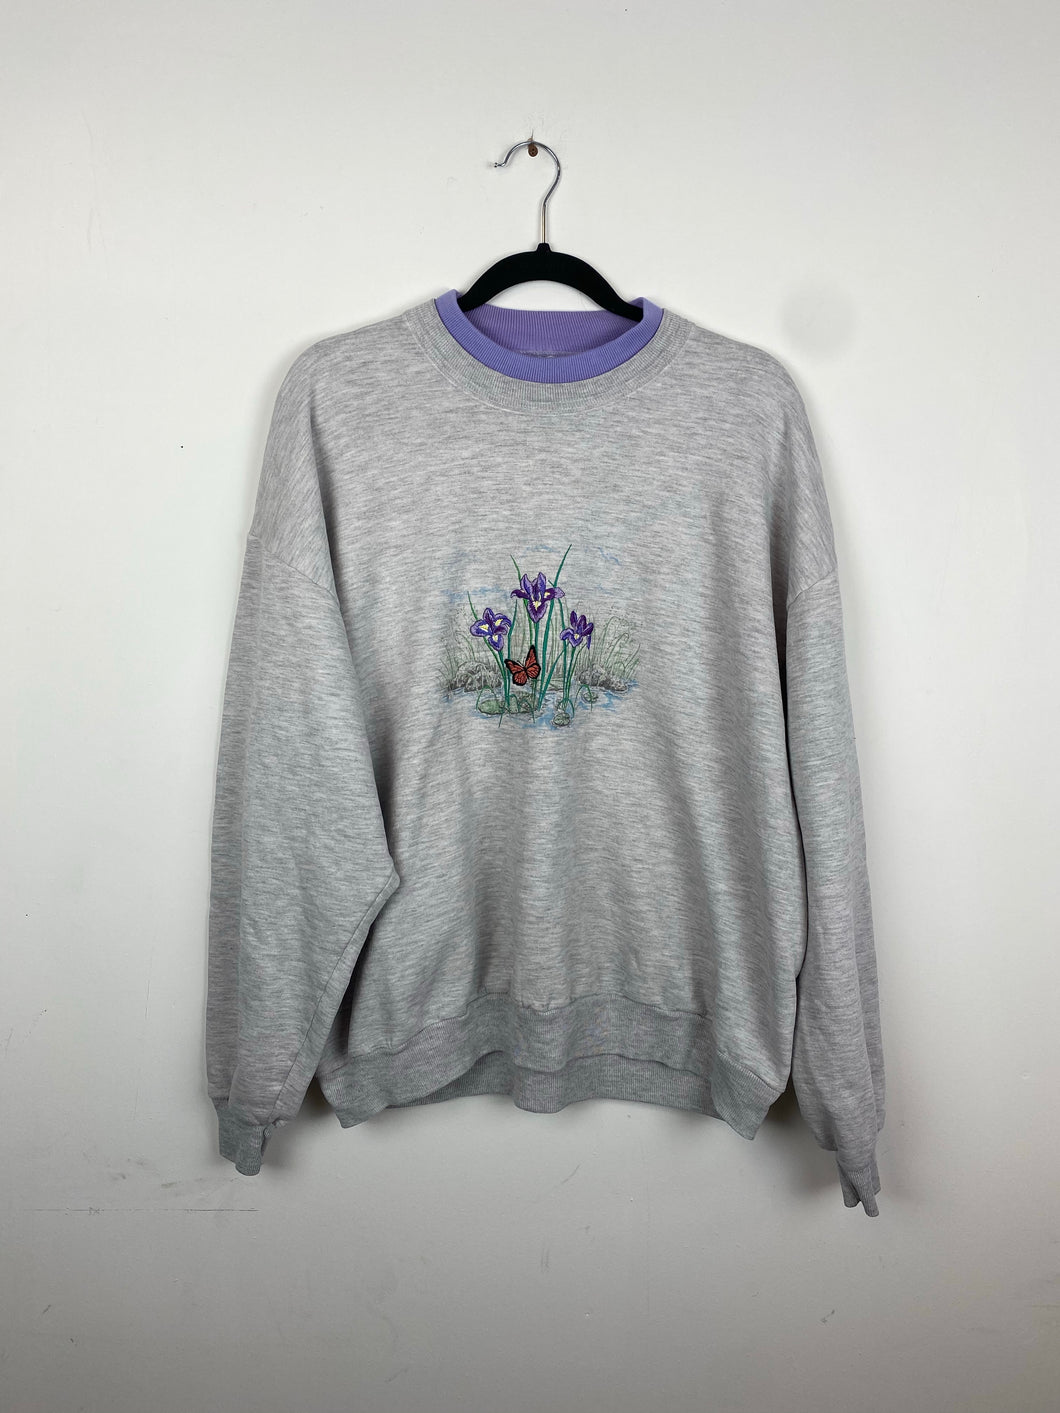 Vintage embroidered butterfly crewneck